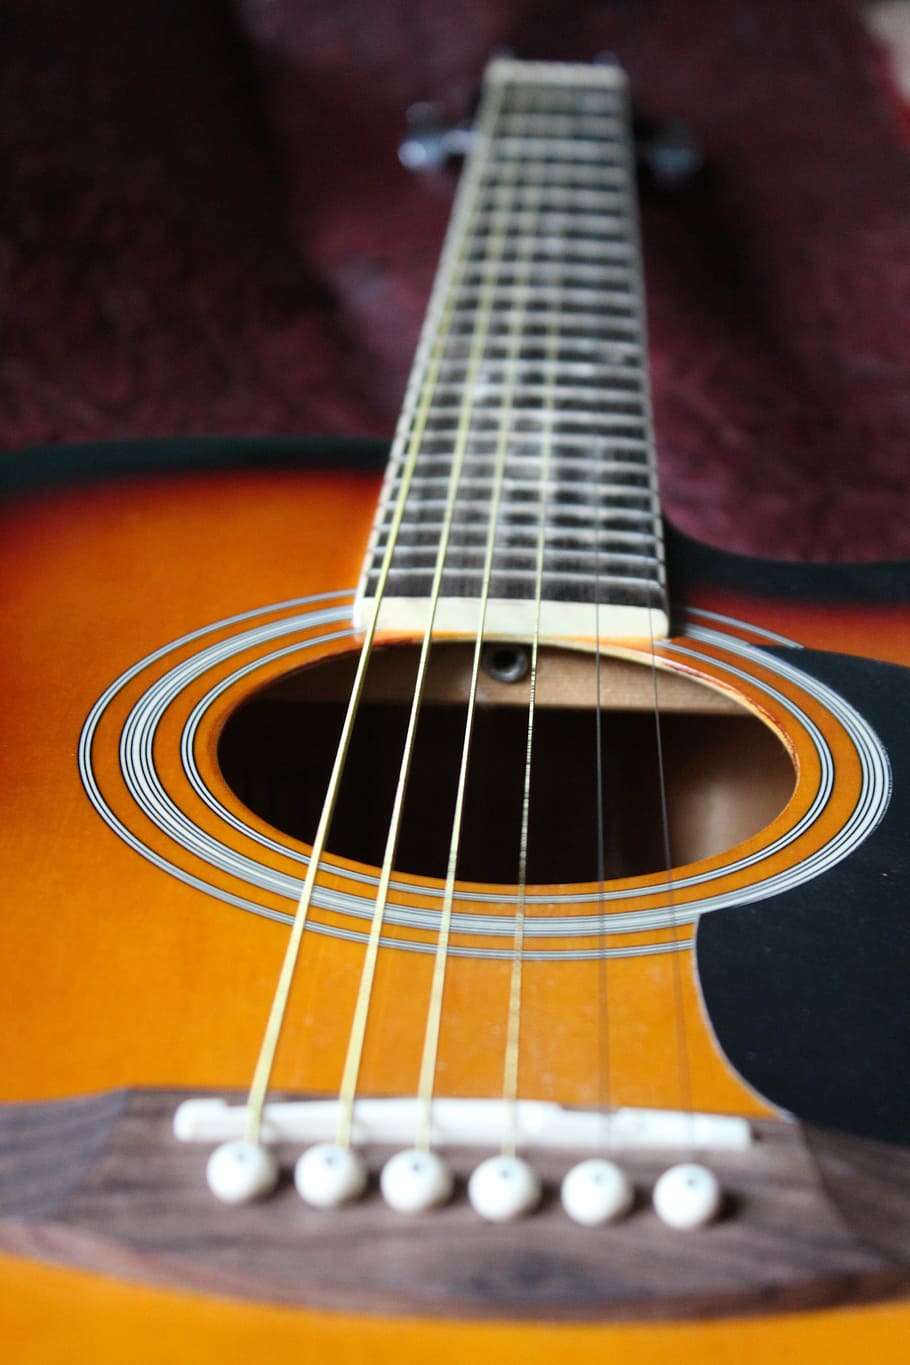 acoustic guitar, musical instrument, music, chords, strings, string instrument, arts culture and entertainment, guitar, musical instrument string, musical equipment